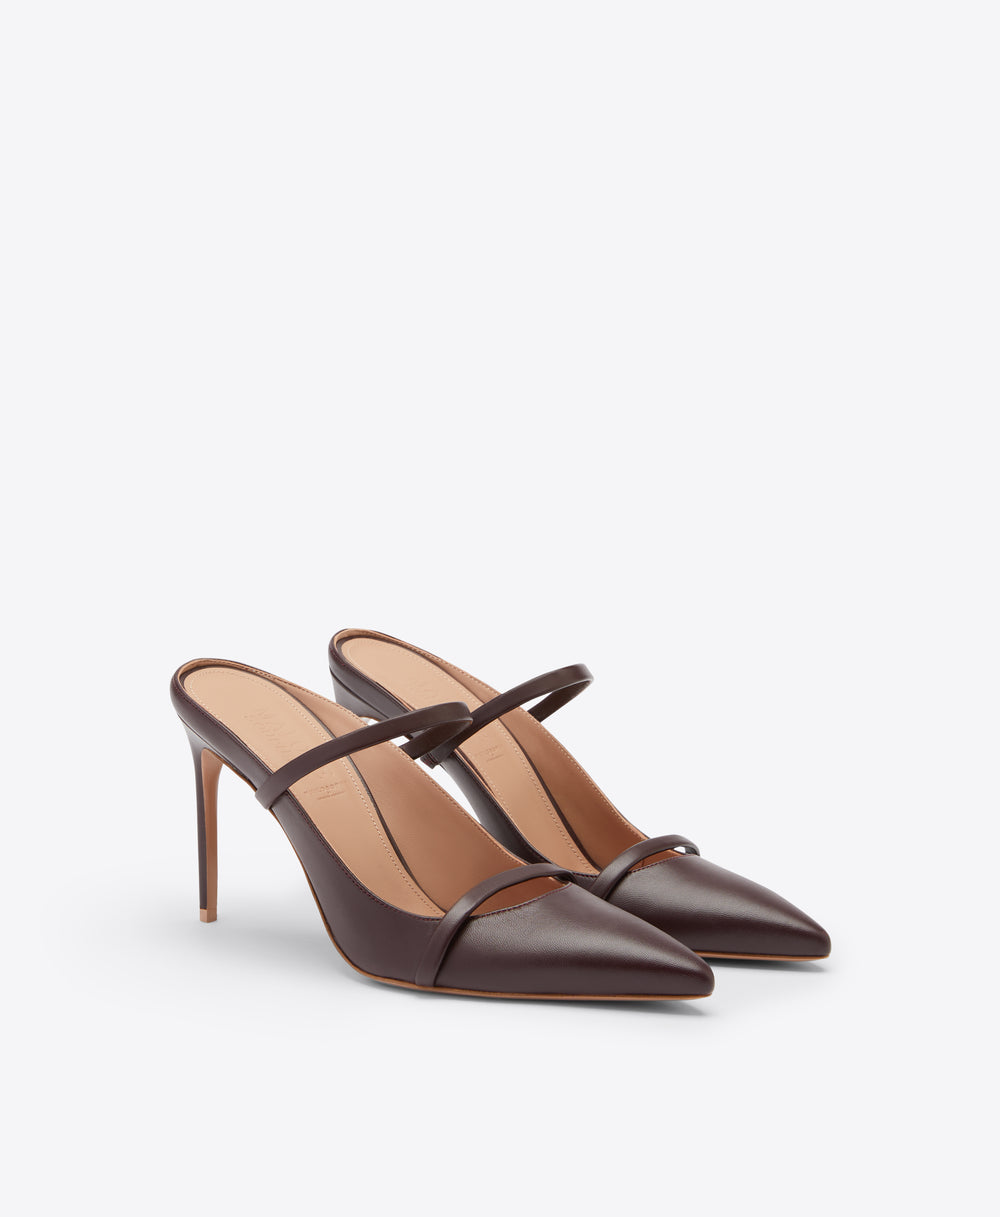 Aurora 90 Cabernet Leather Heeled Mule Malone Souliers